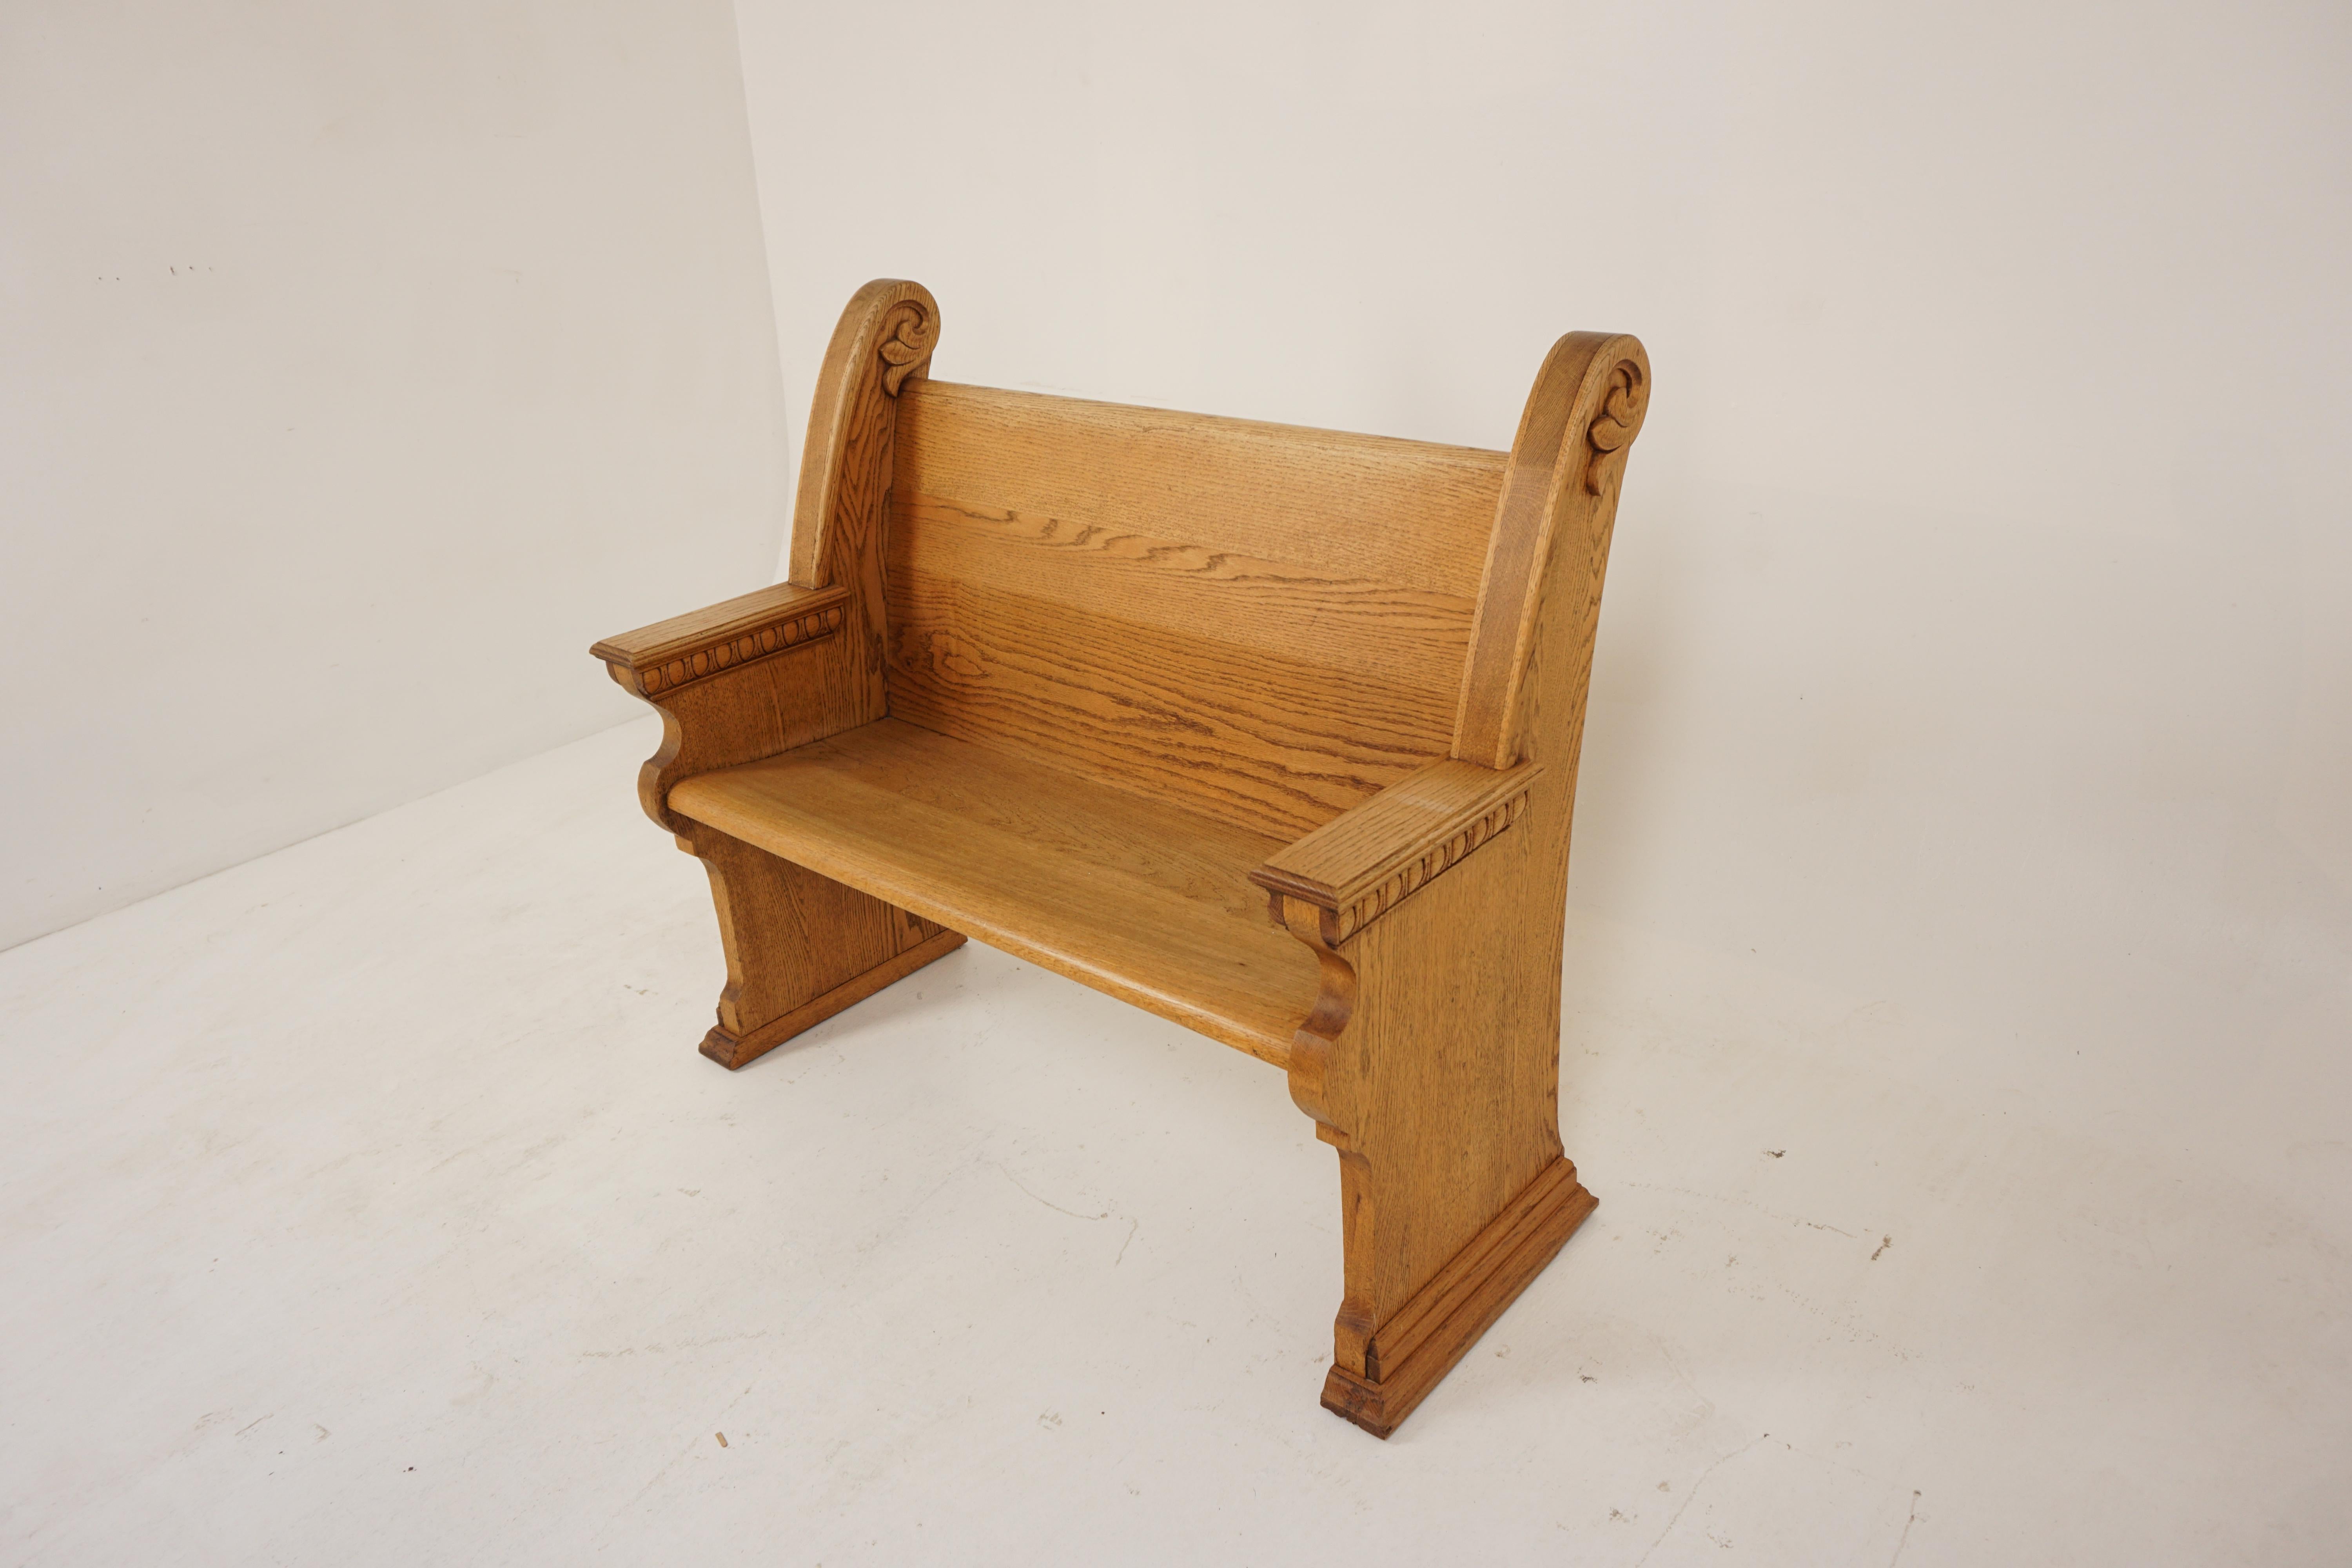 Details about   Collectible Solid Oak Church Pew Vintage Good Condition  2 Identical Pieces. 